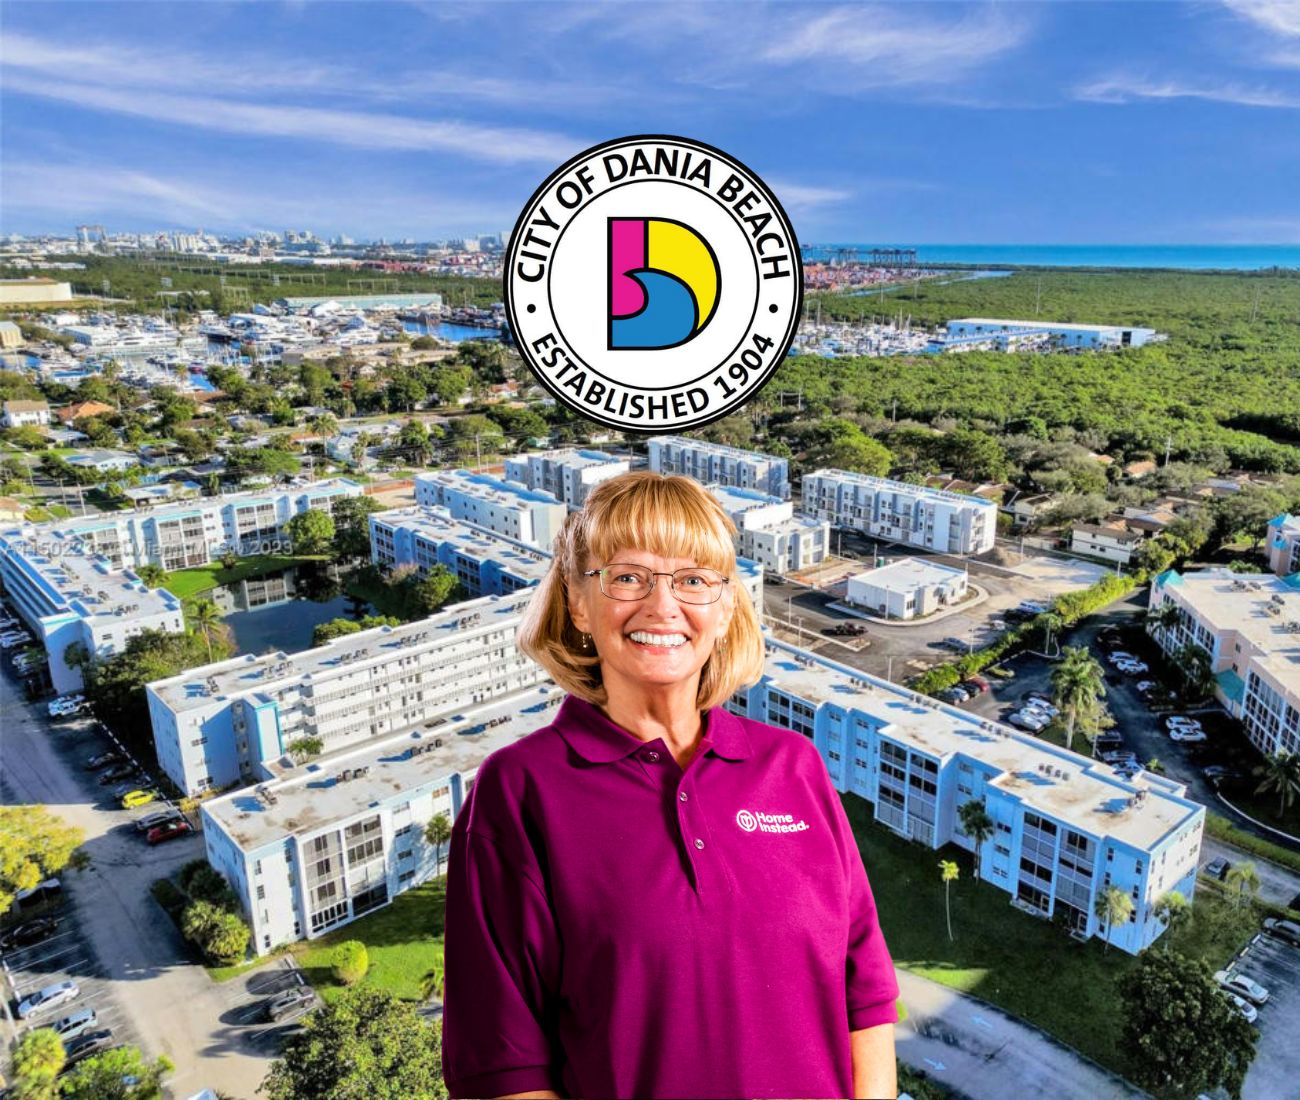 Home Instead caregiver with Dania Beach, FL in the background